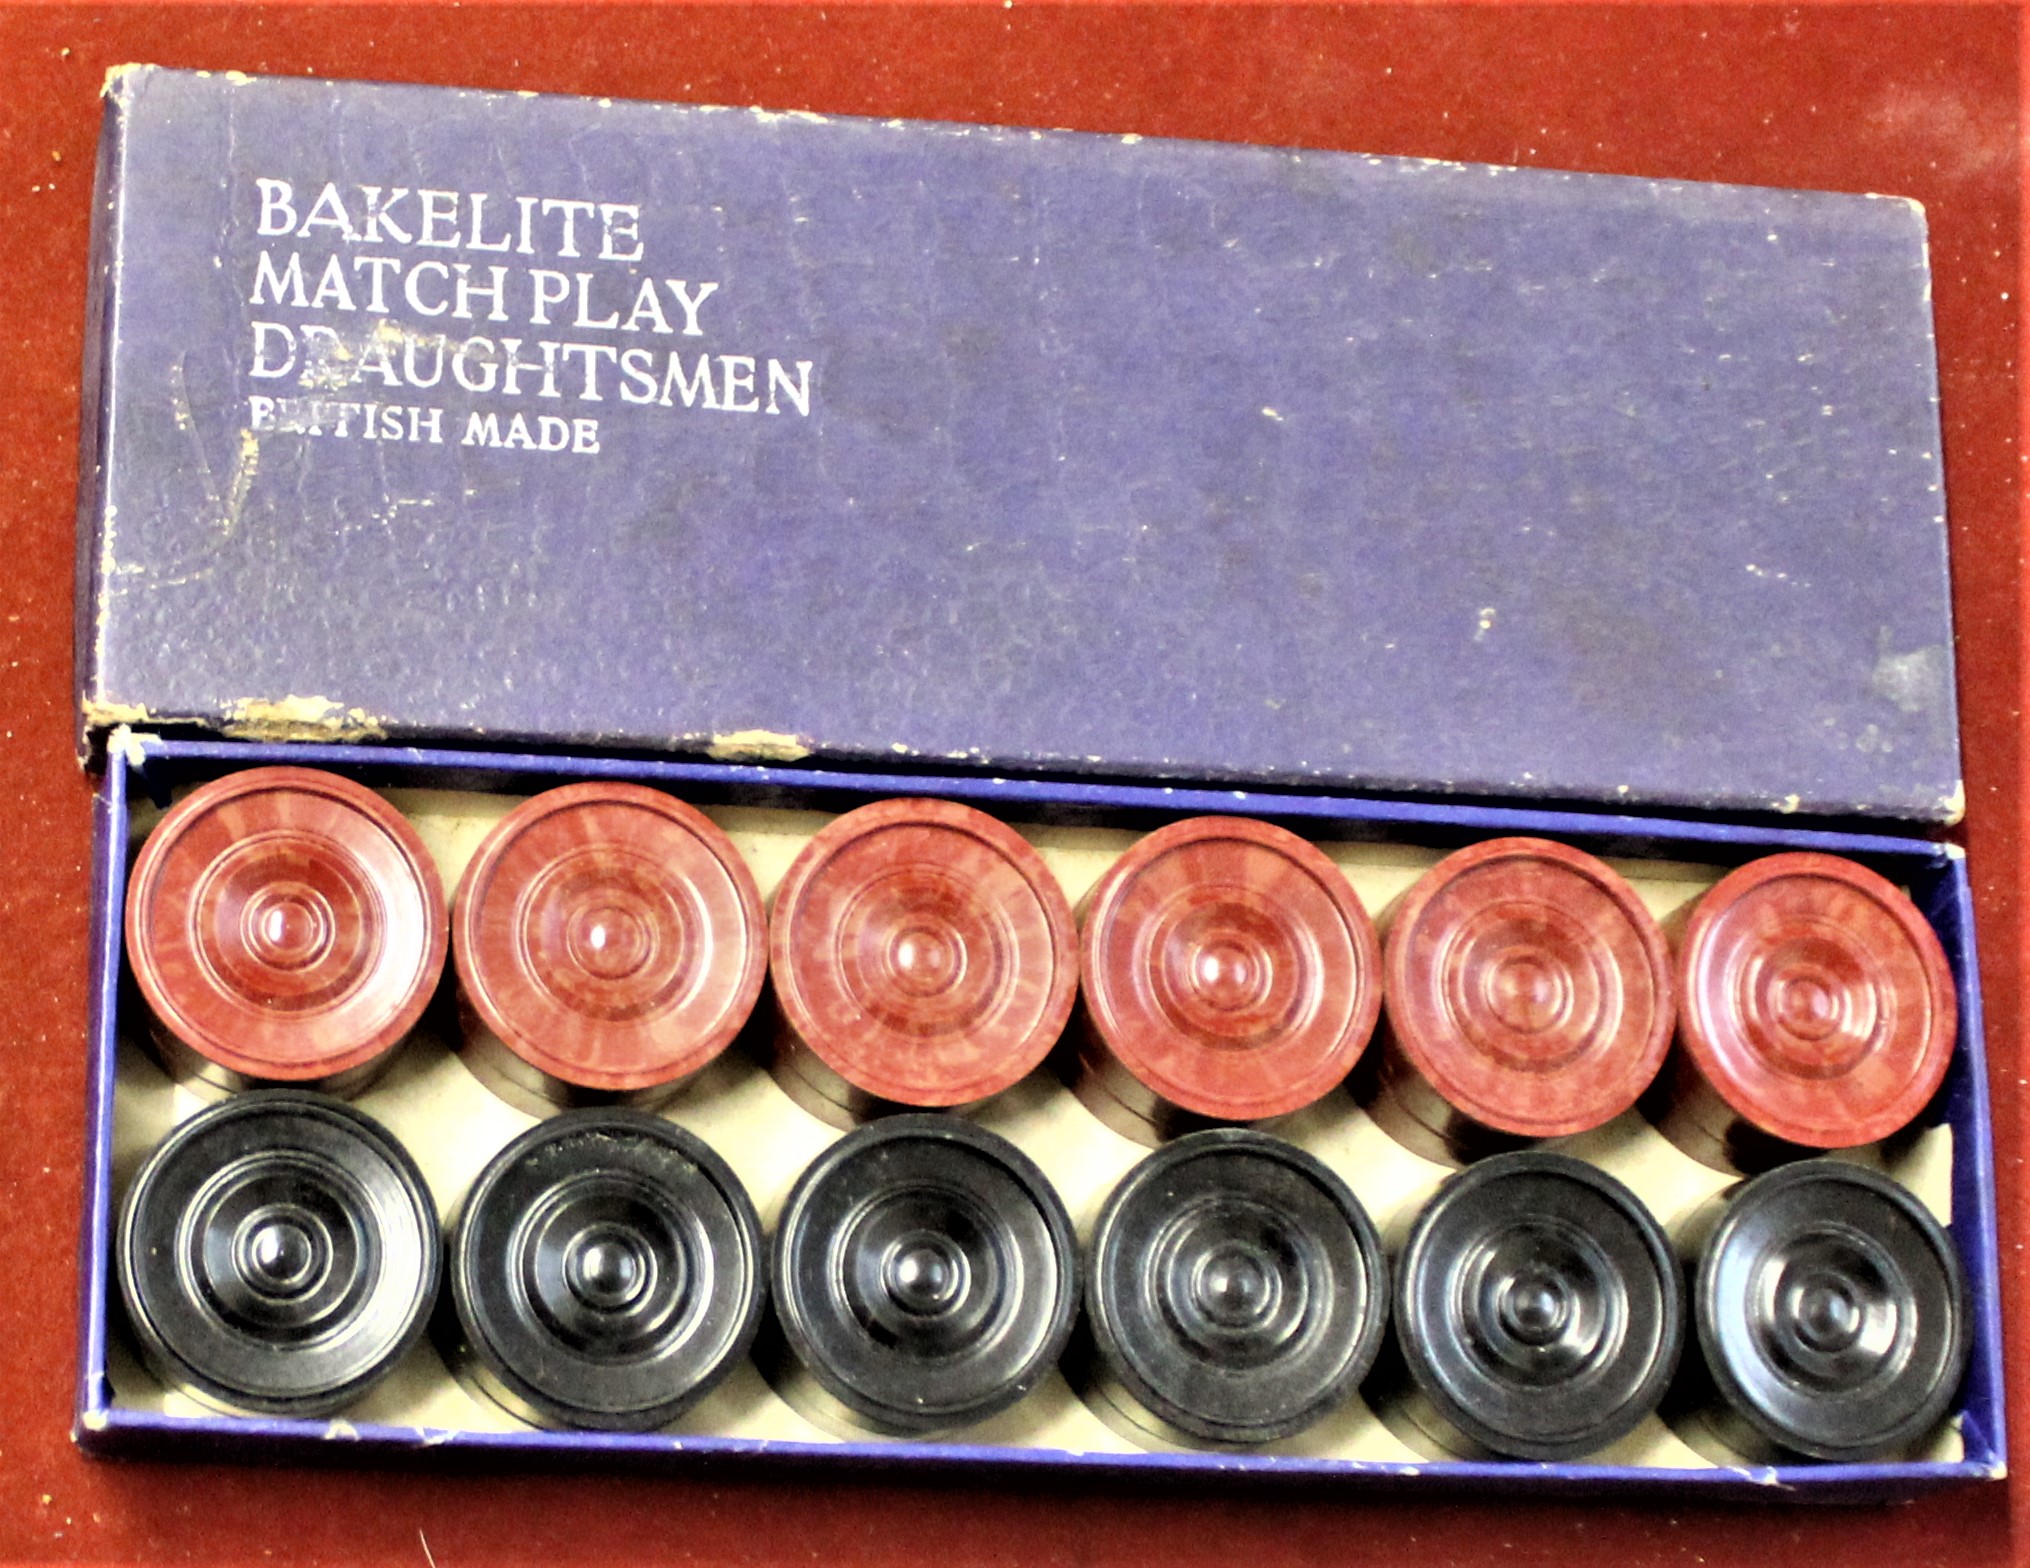 Vintage-Bakelite Match Play-Draughtsmen-British made-full set-box some wear but counters in